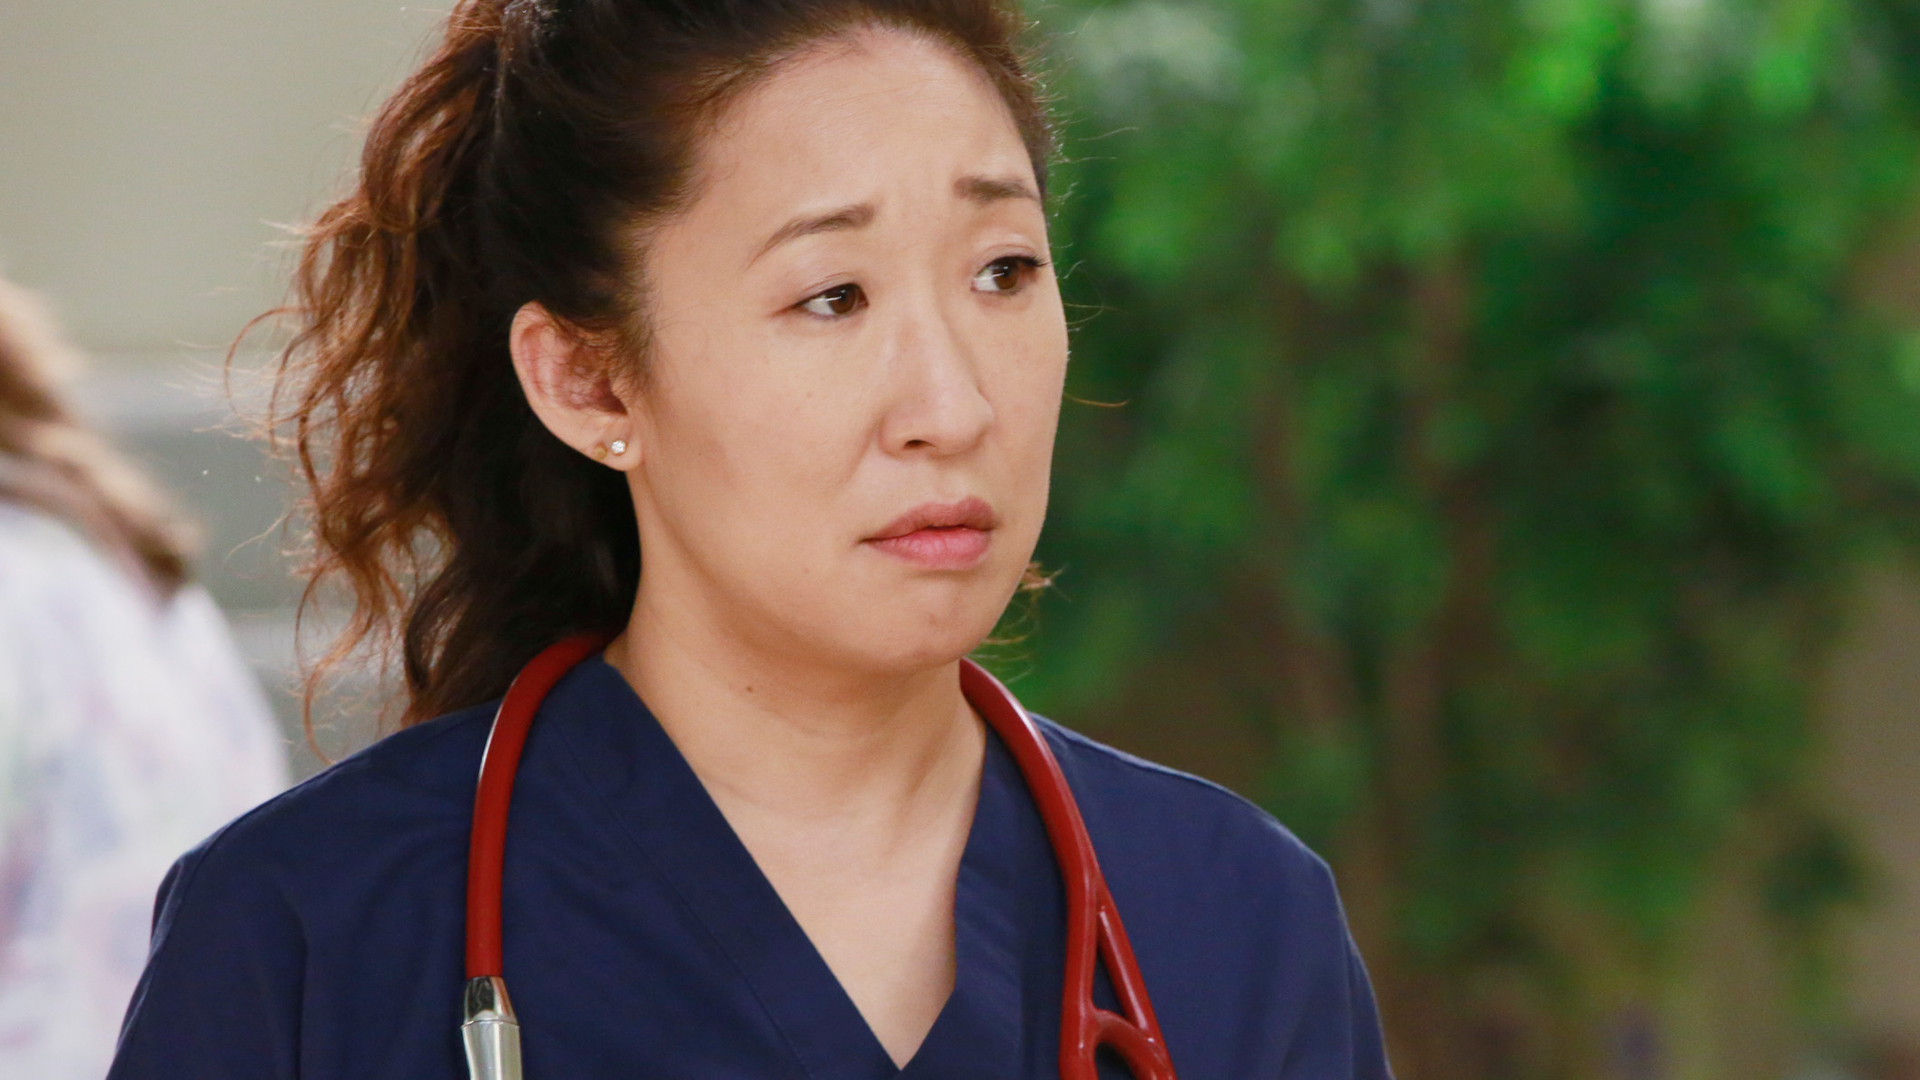 Grey's Anatomy': Why Sandra Oh Won't Return as Cristina Yang, Even for the Series Finale